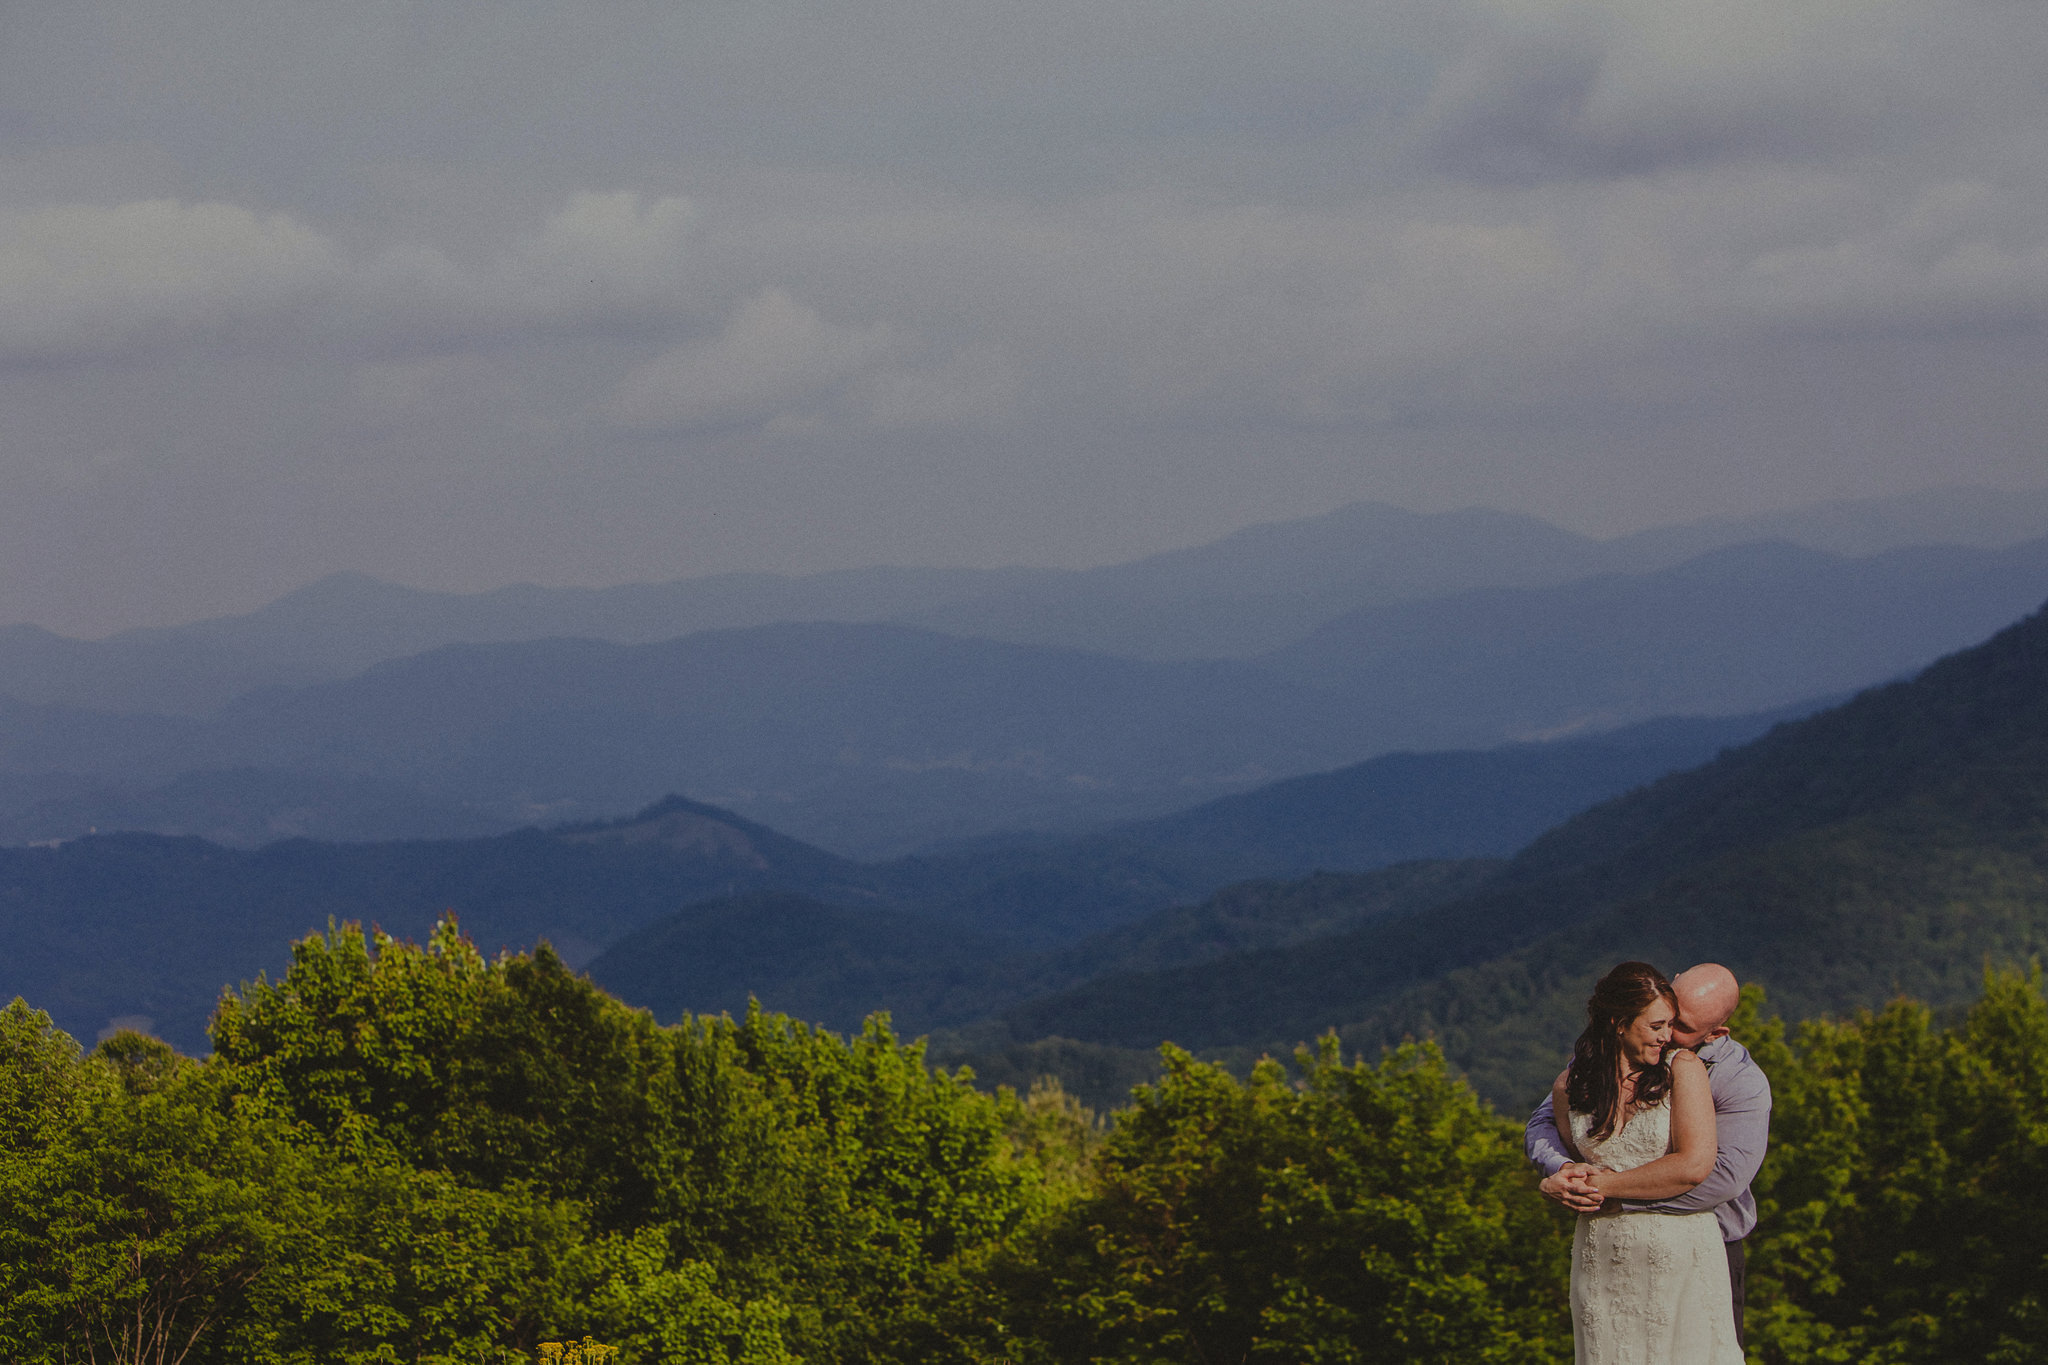 Newly weds Nicki & Brad snuggle close with a breathtaking view of the appalachian mountains on the blue ridge parkway.